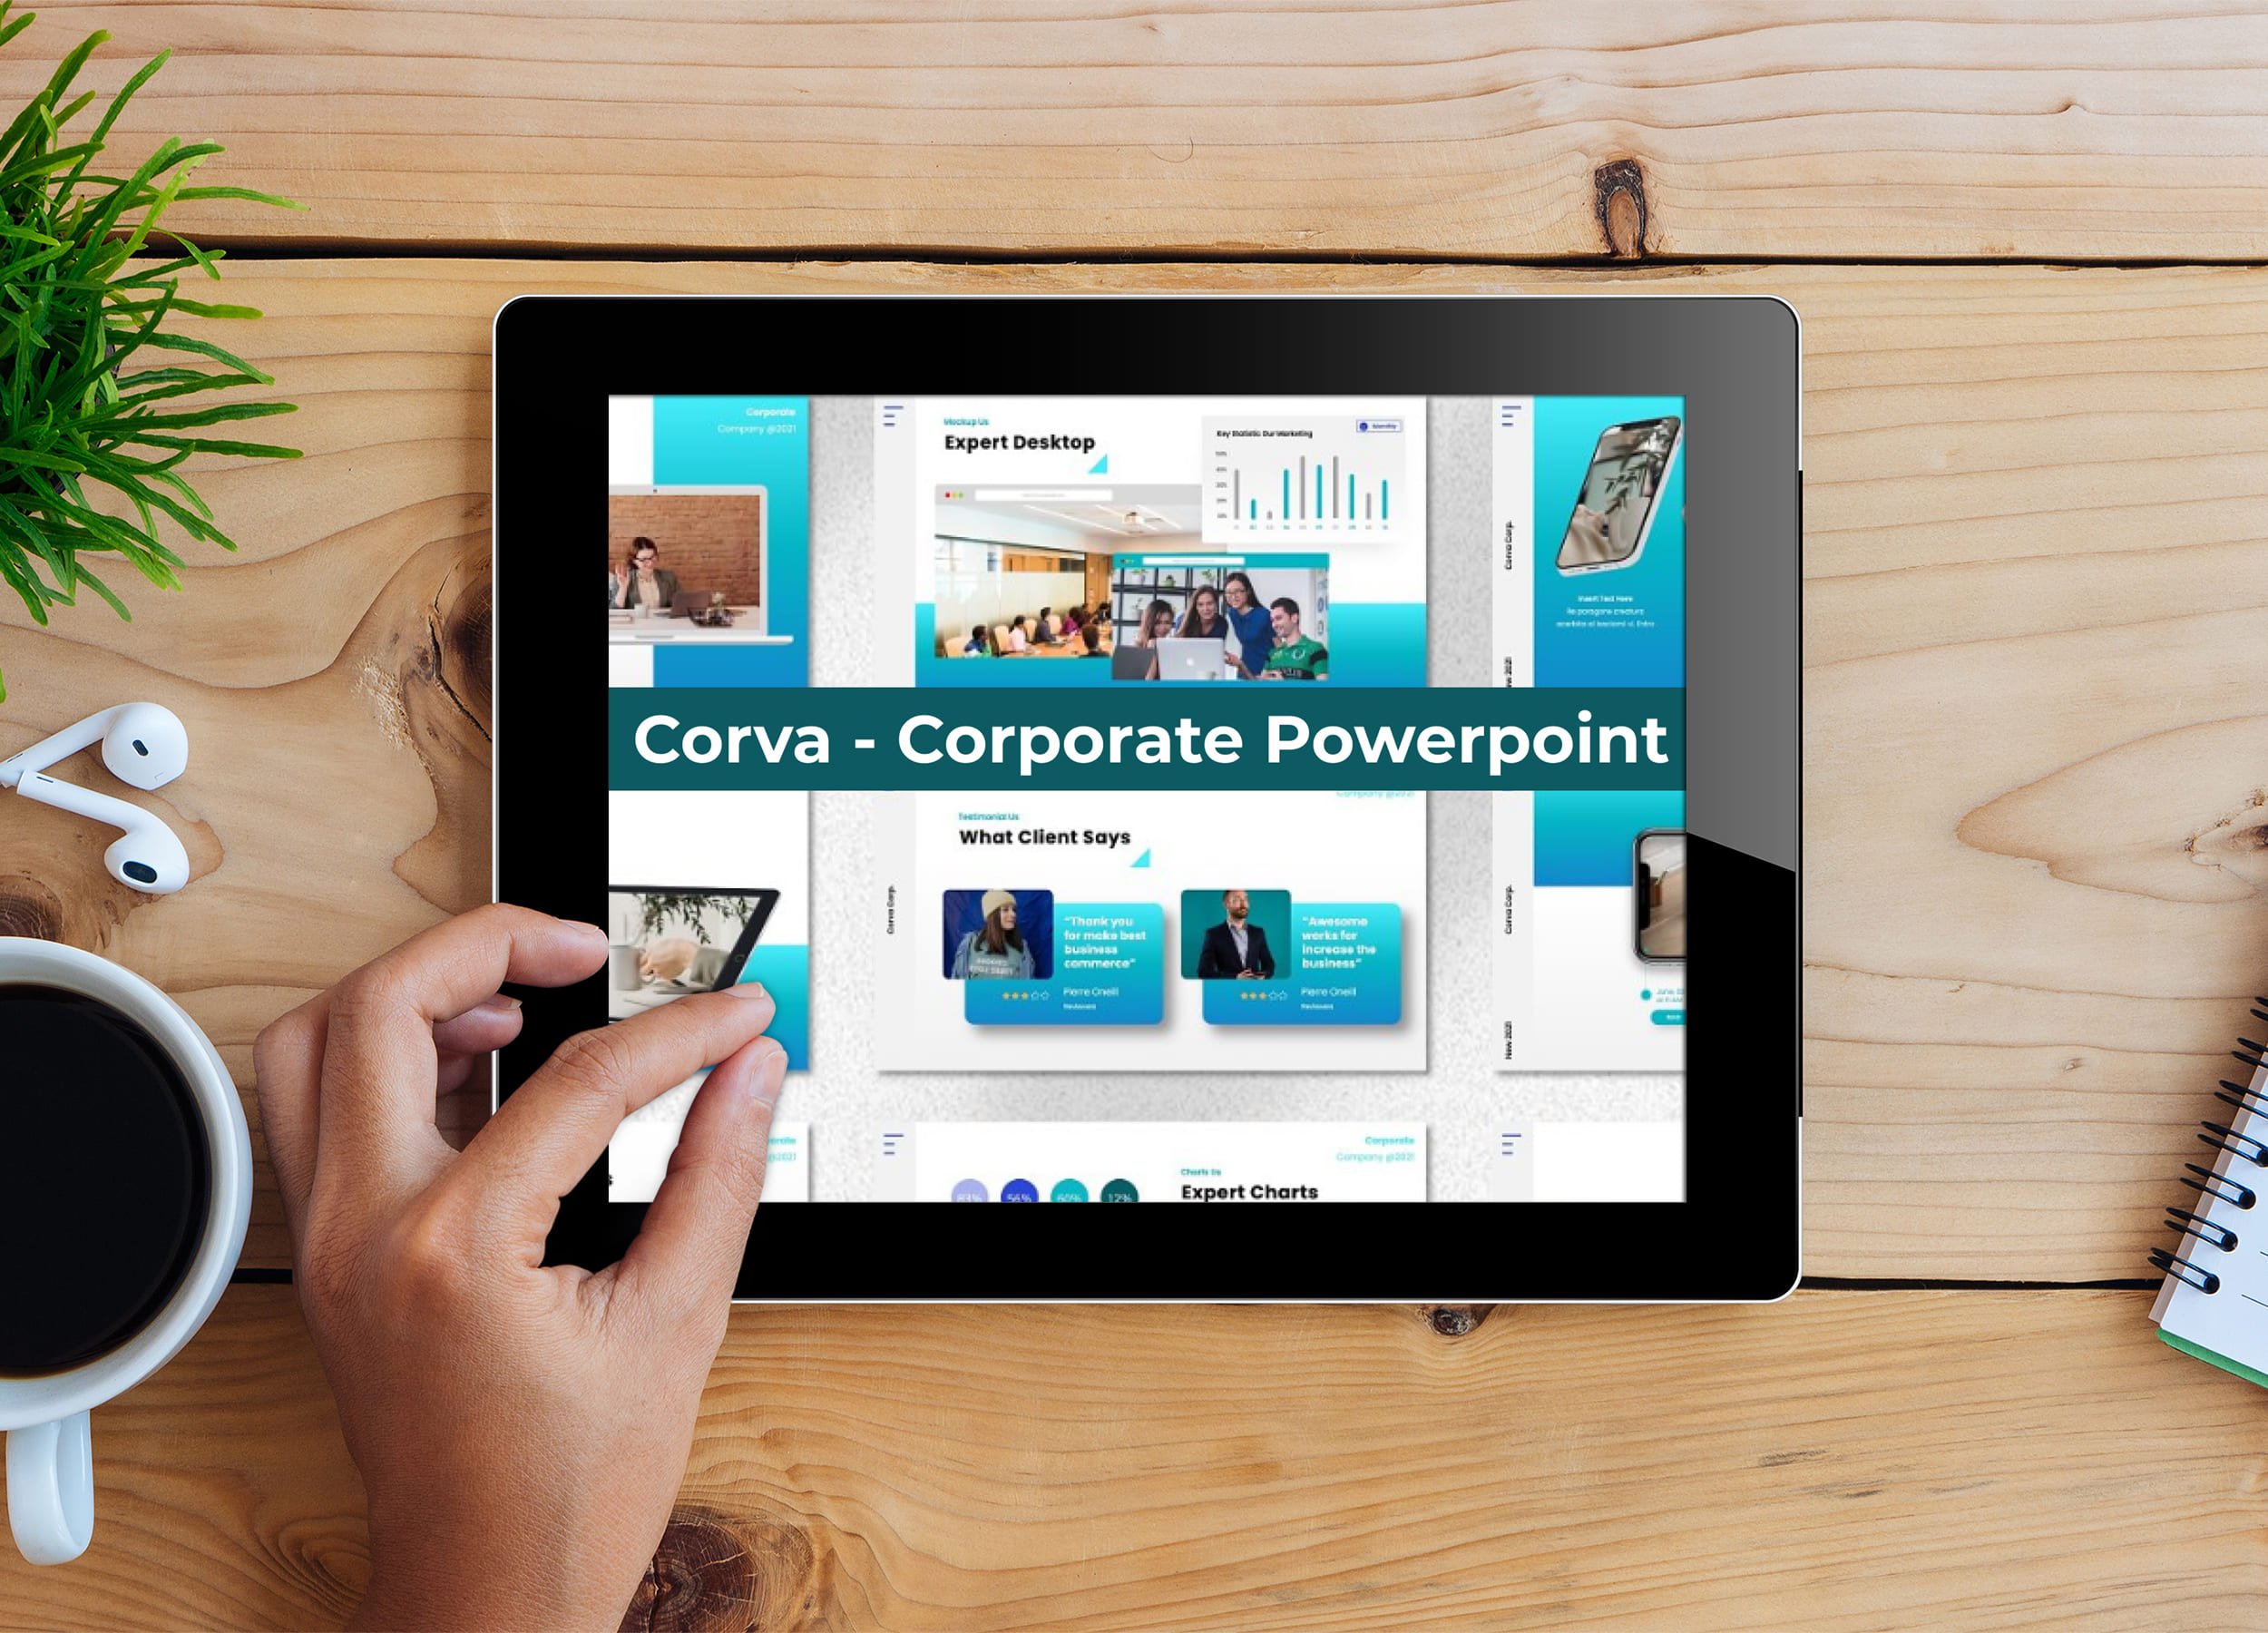 Tablet option of the Corva - Corporate Powerpoint.